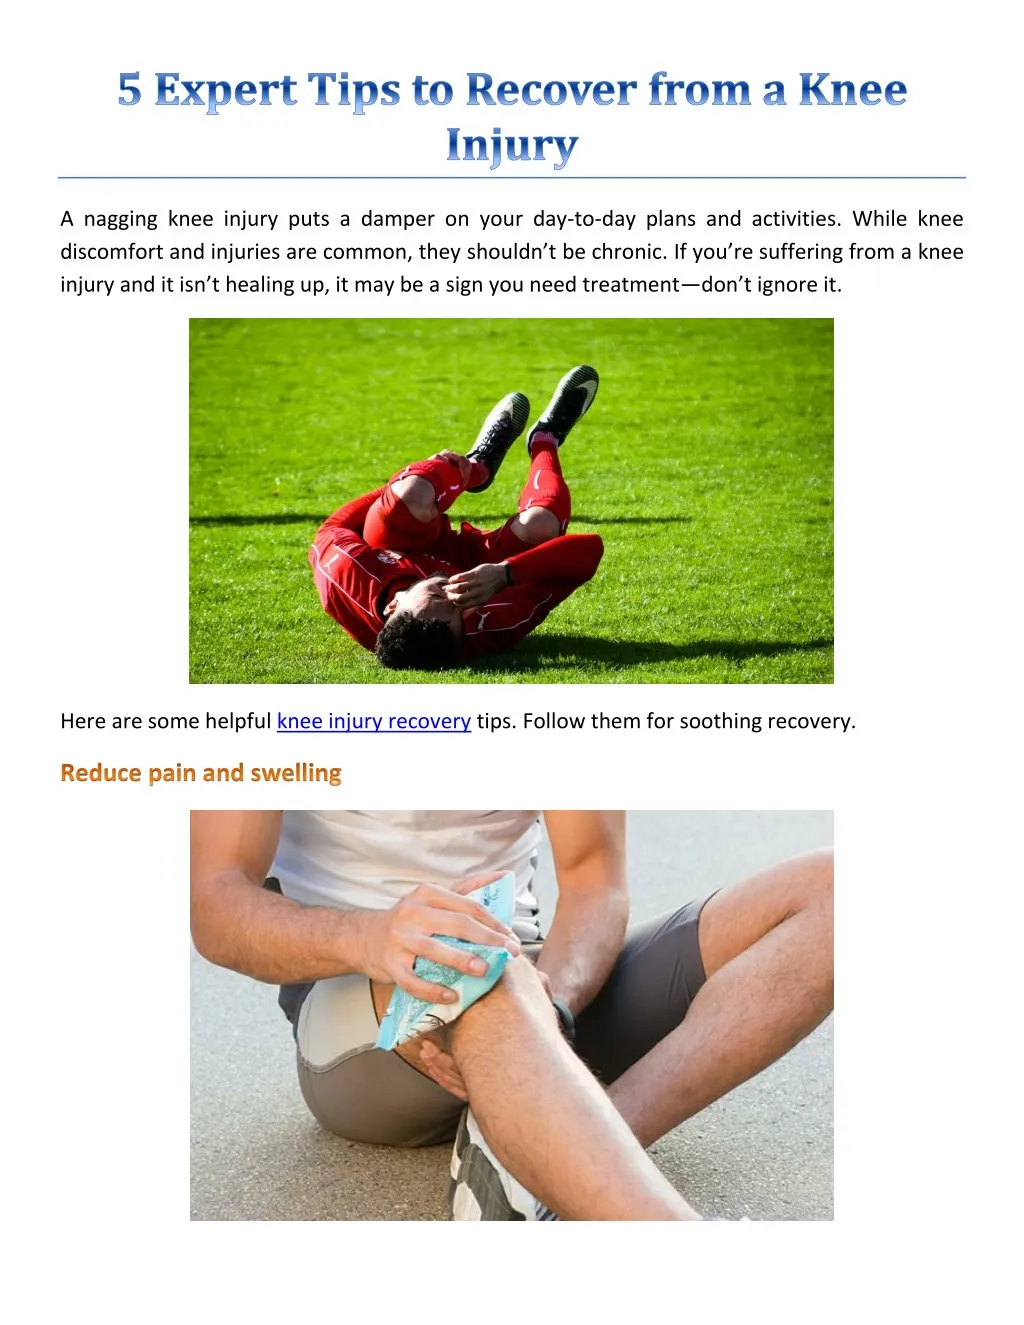 a nagging knee injury puts a damper on your